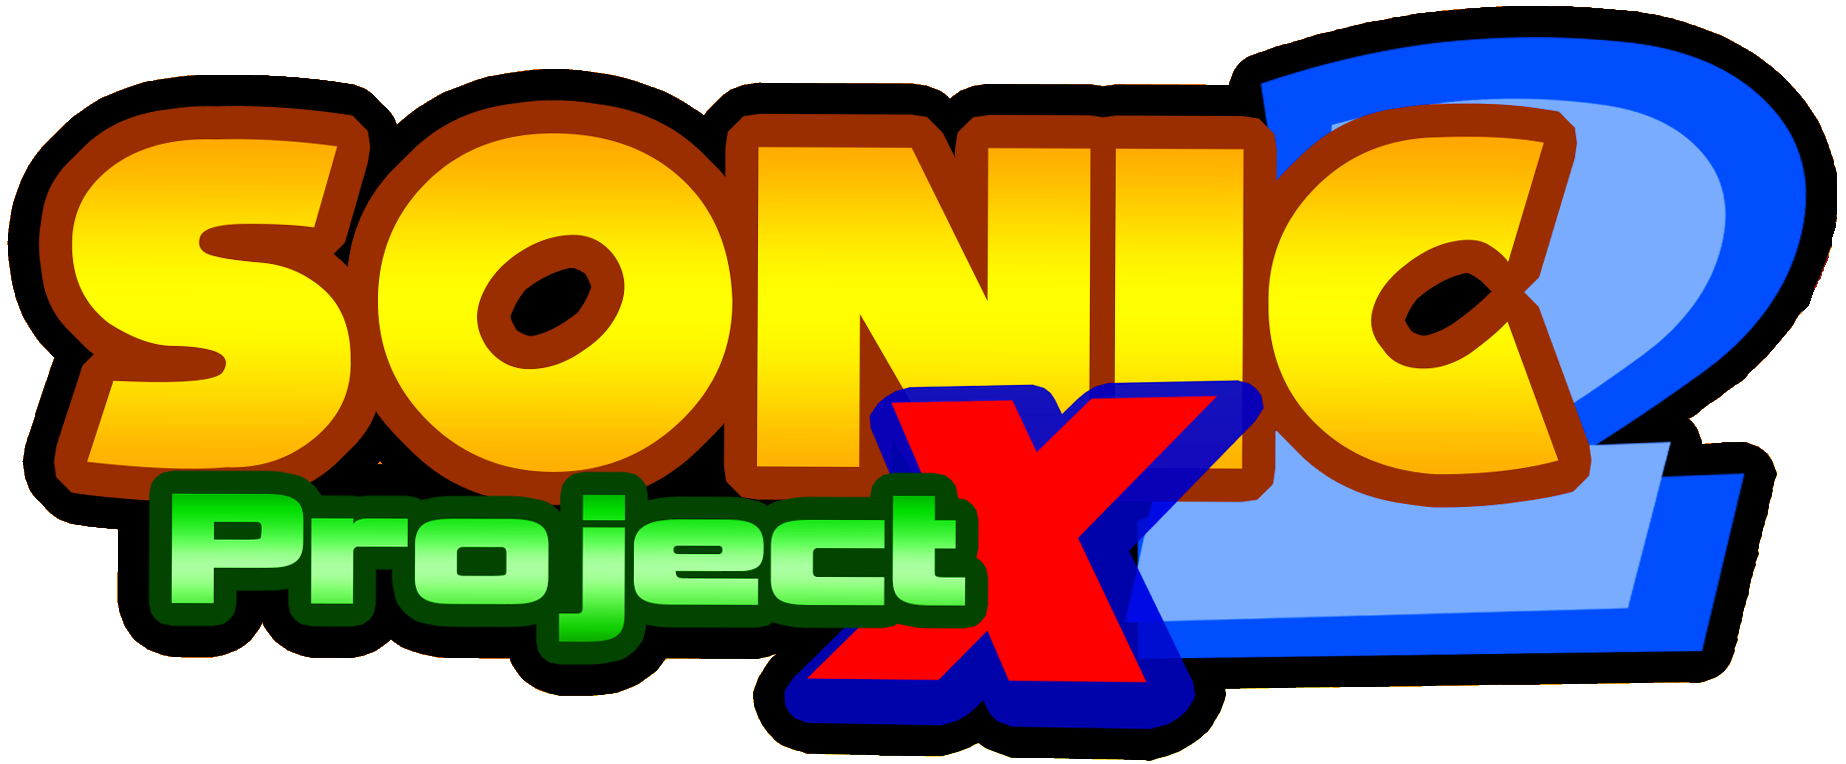 download project x sonic